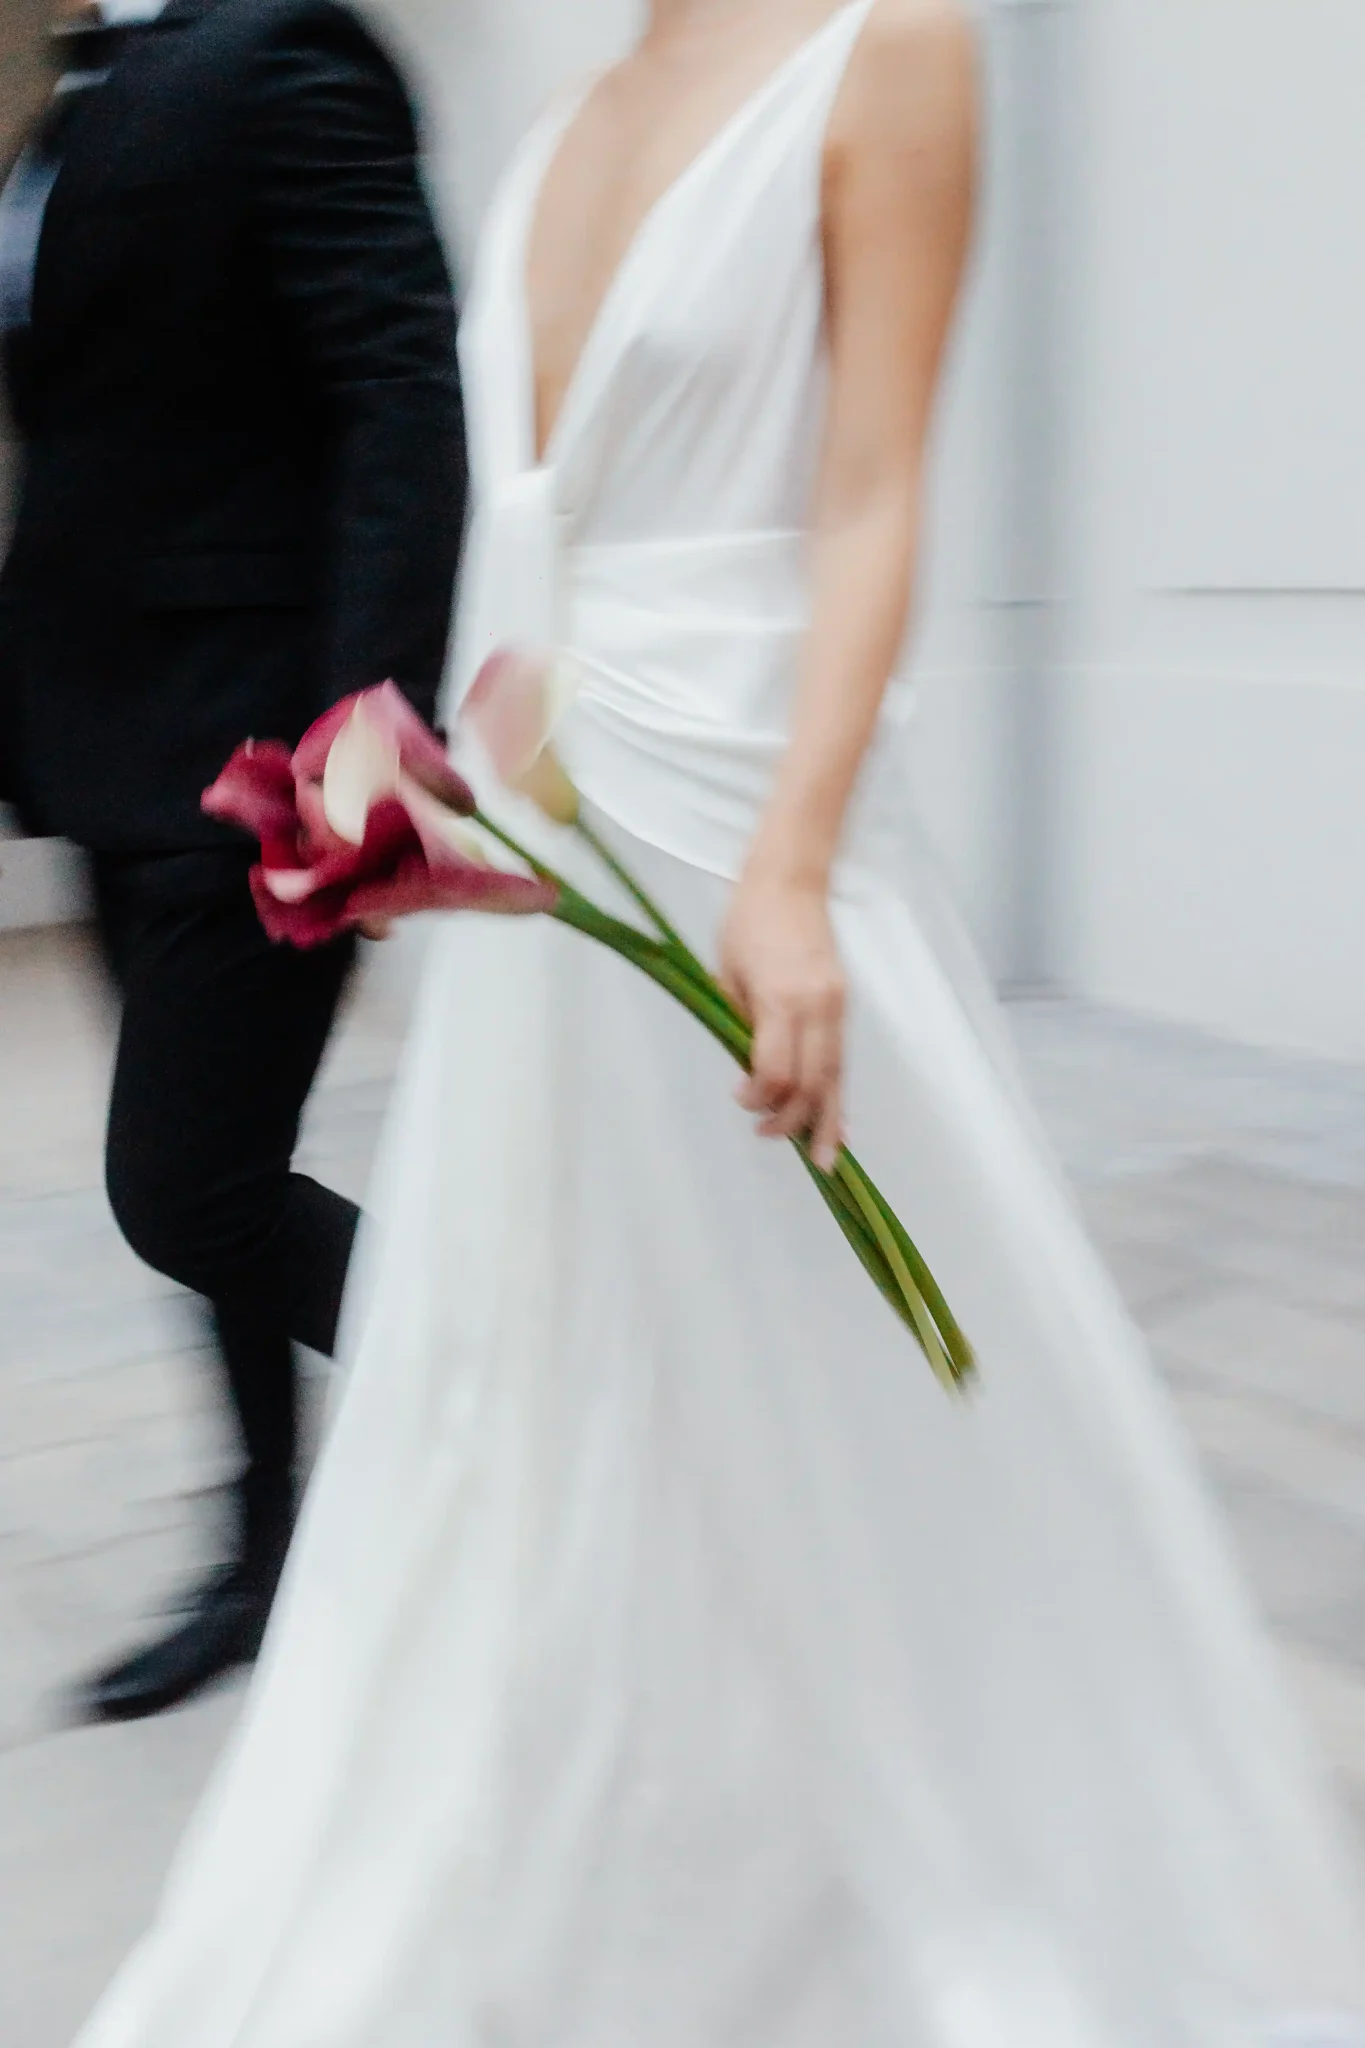 Detail shot of a wedding dress and flowers in motion